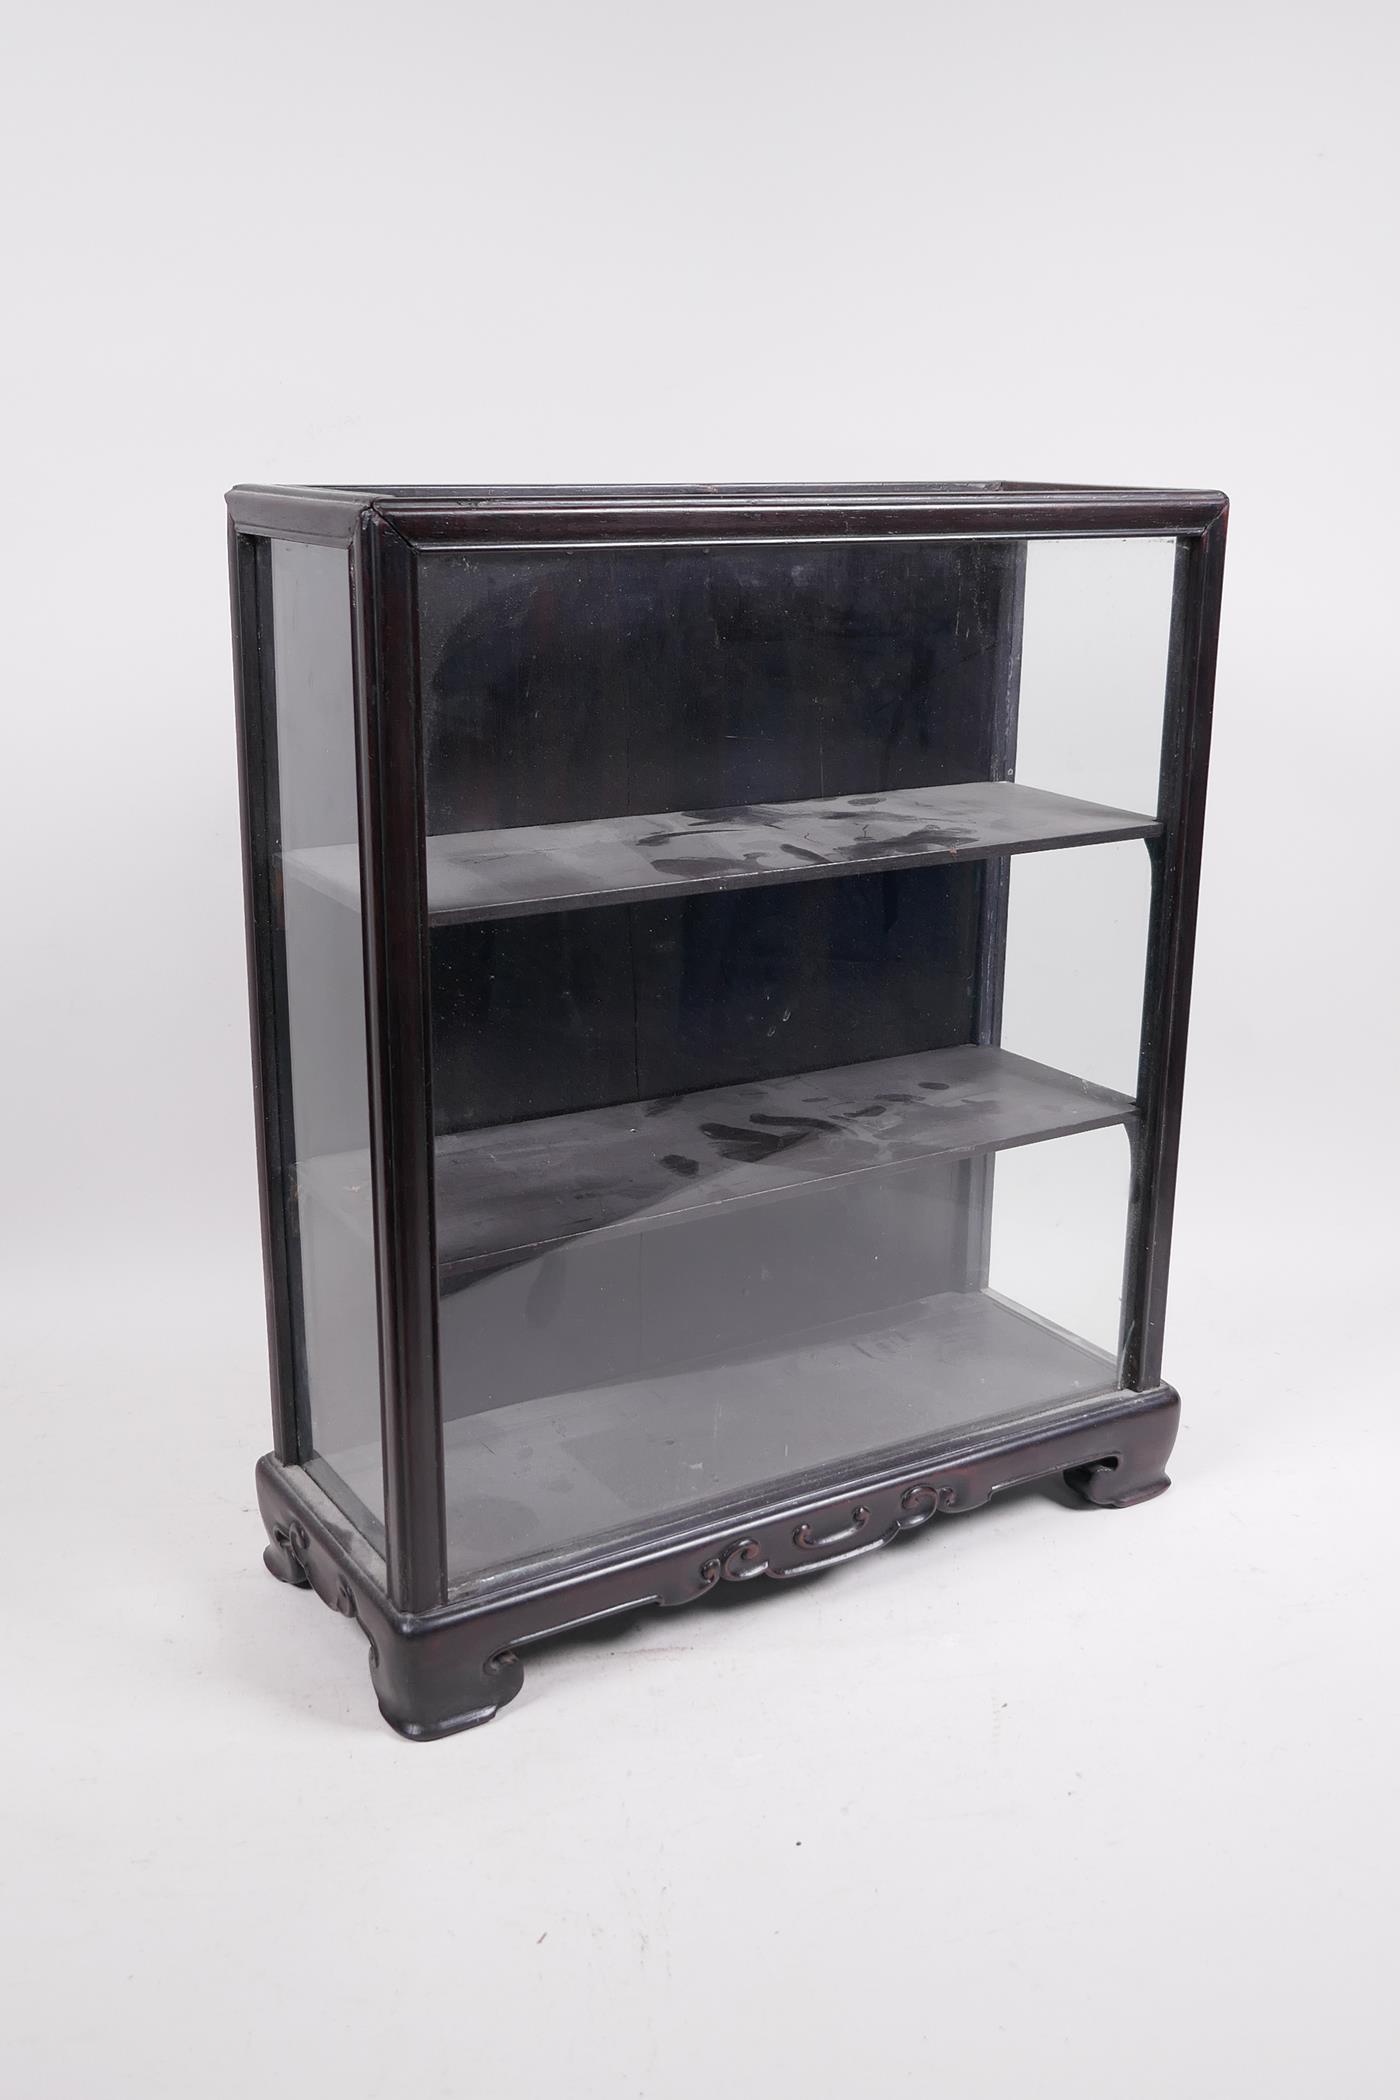 An antique Chinese hardwood and glass miniature display cabinet, 12½" x 5", 15" high